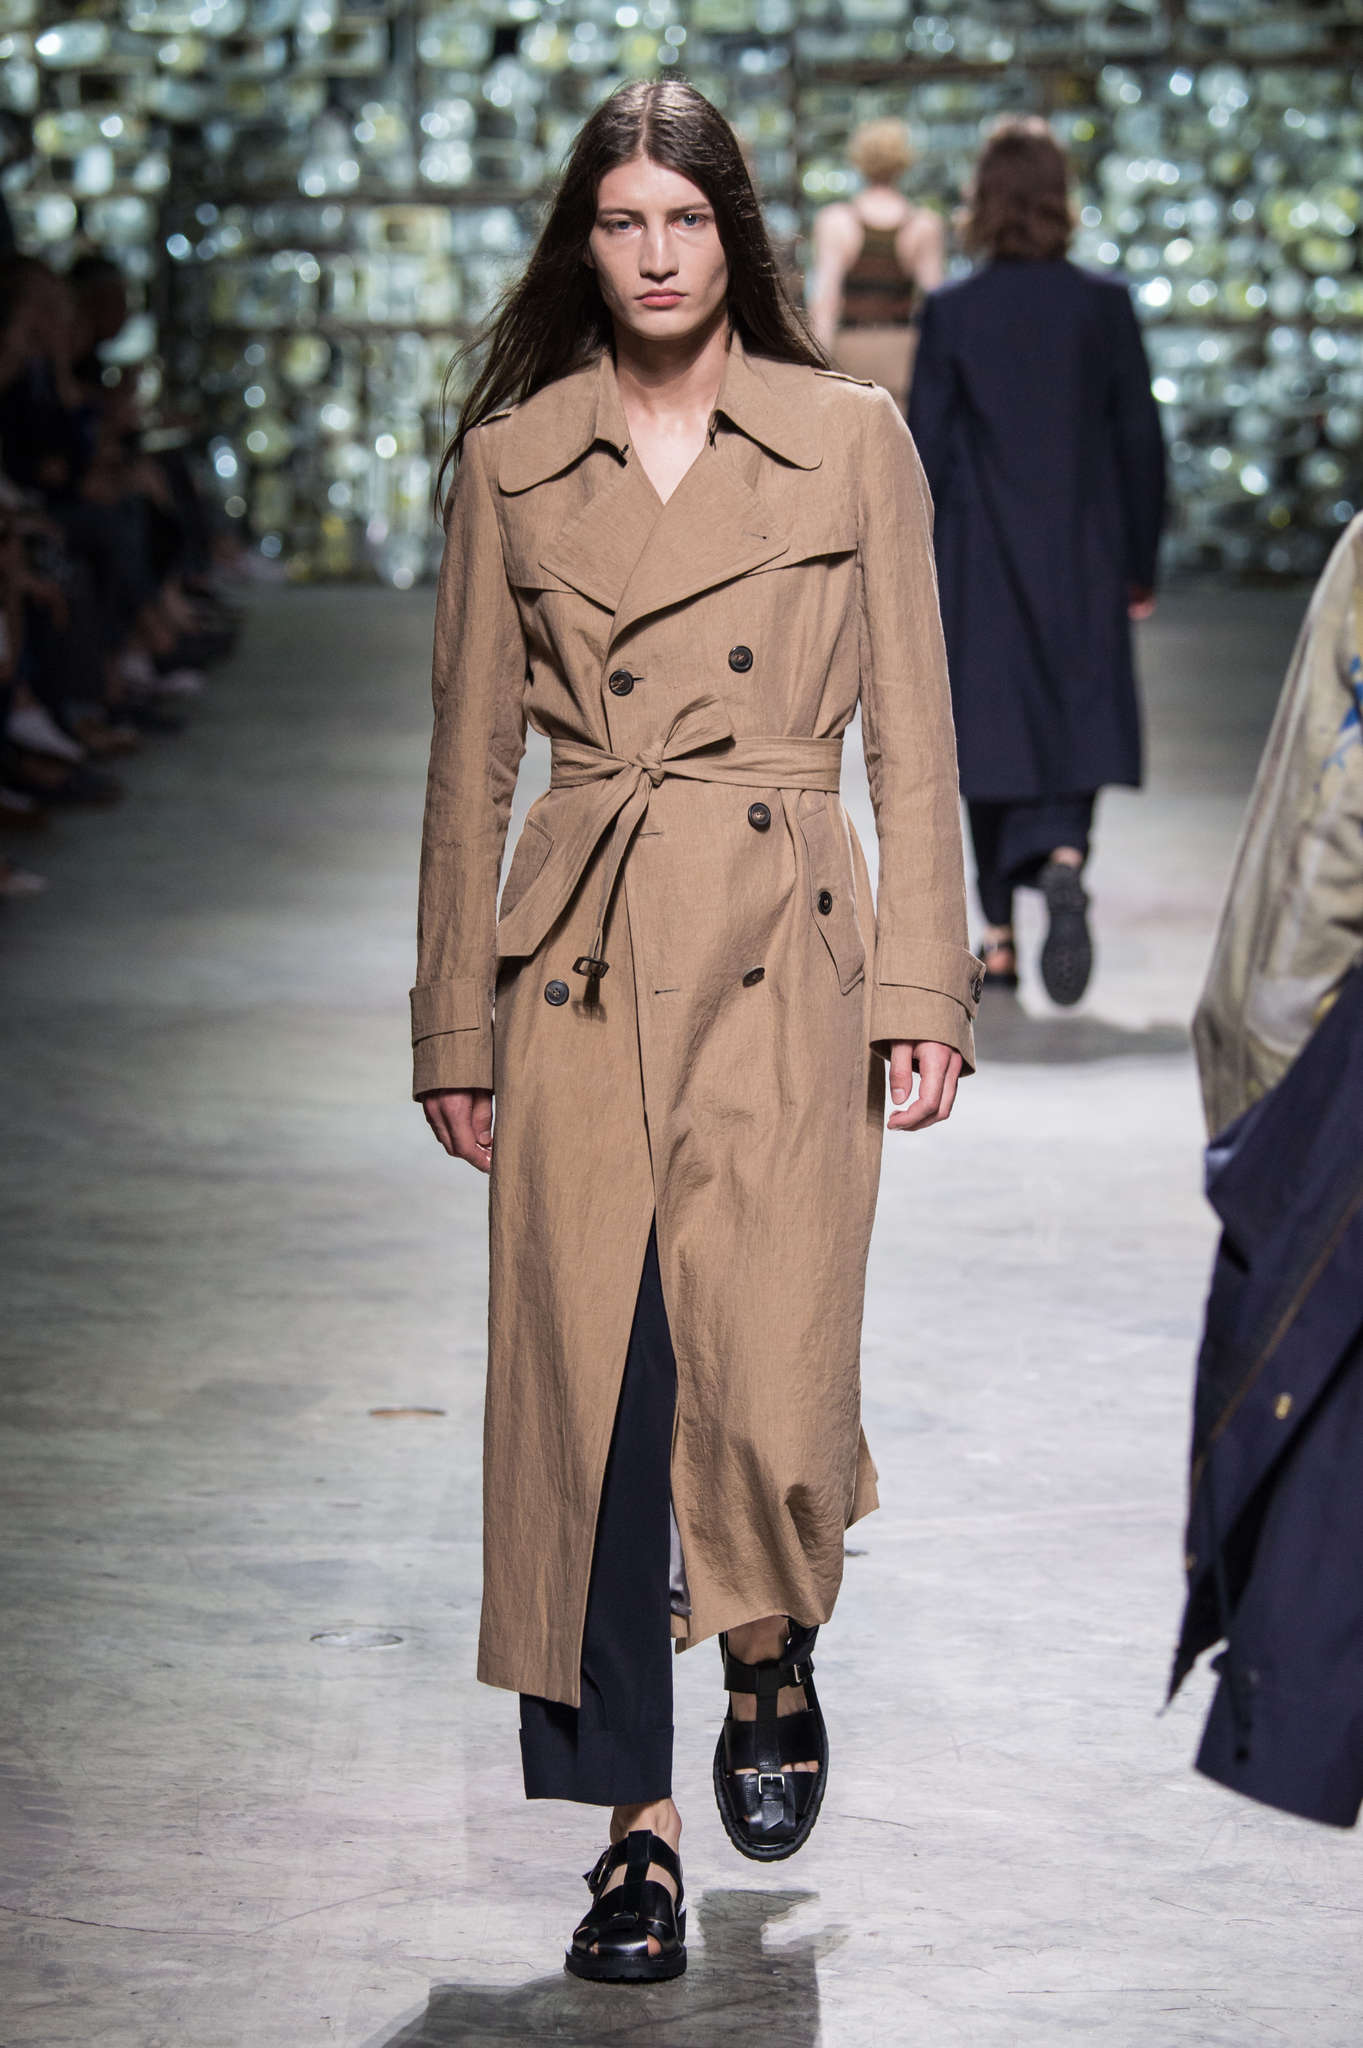 Trench Coats Are A Must Have This Autumn | Fashion News - CONVERSATIONS ...